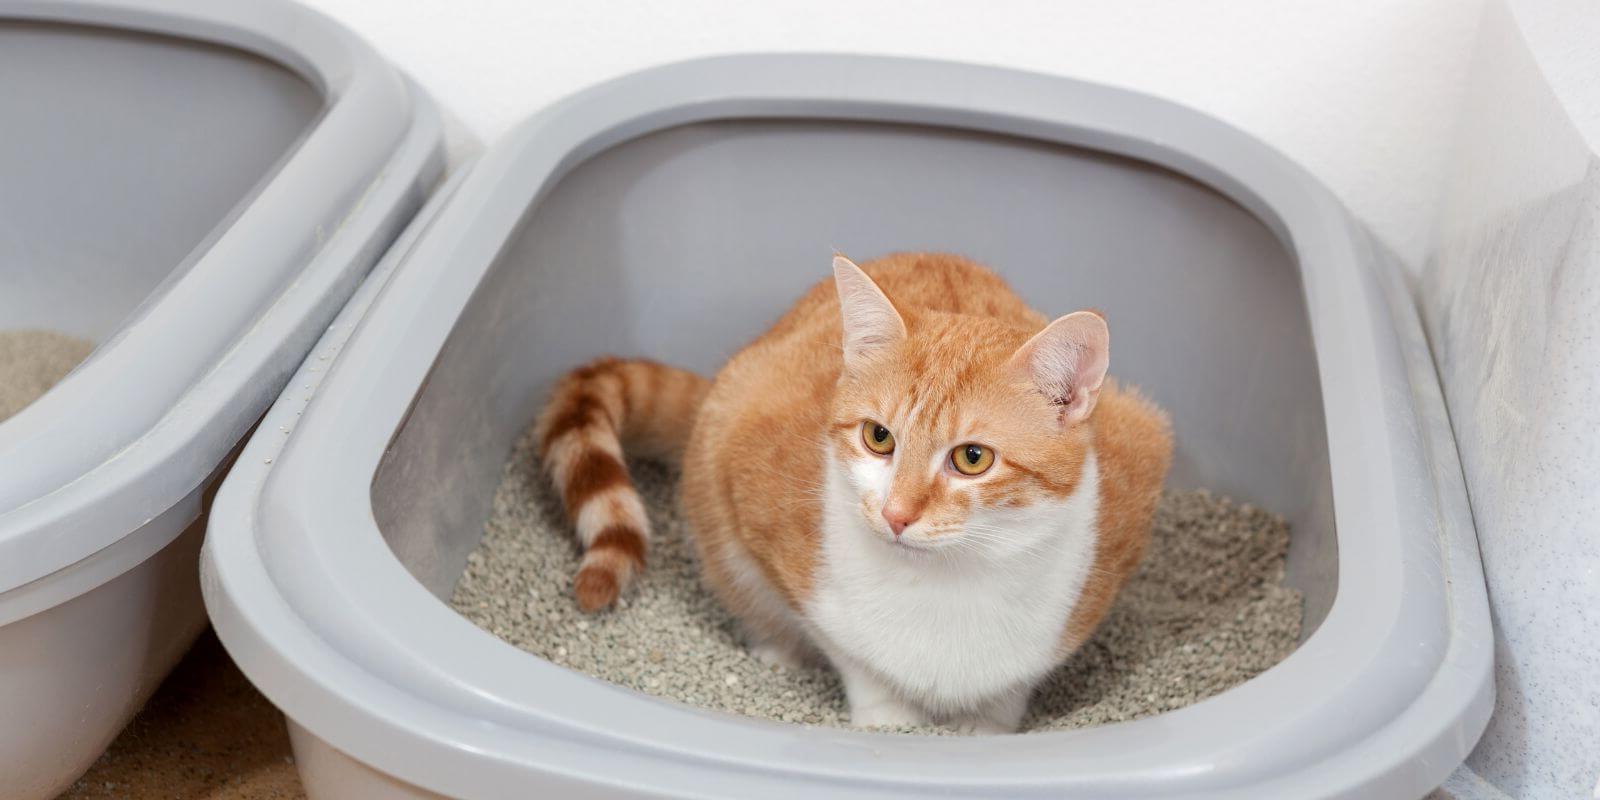 How To Get My Cat To Poop In The Litter Box